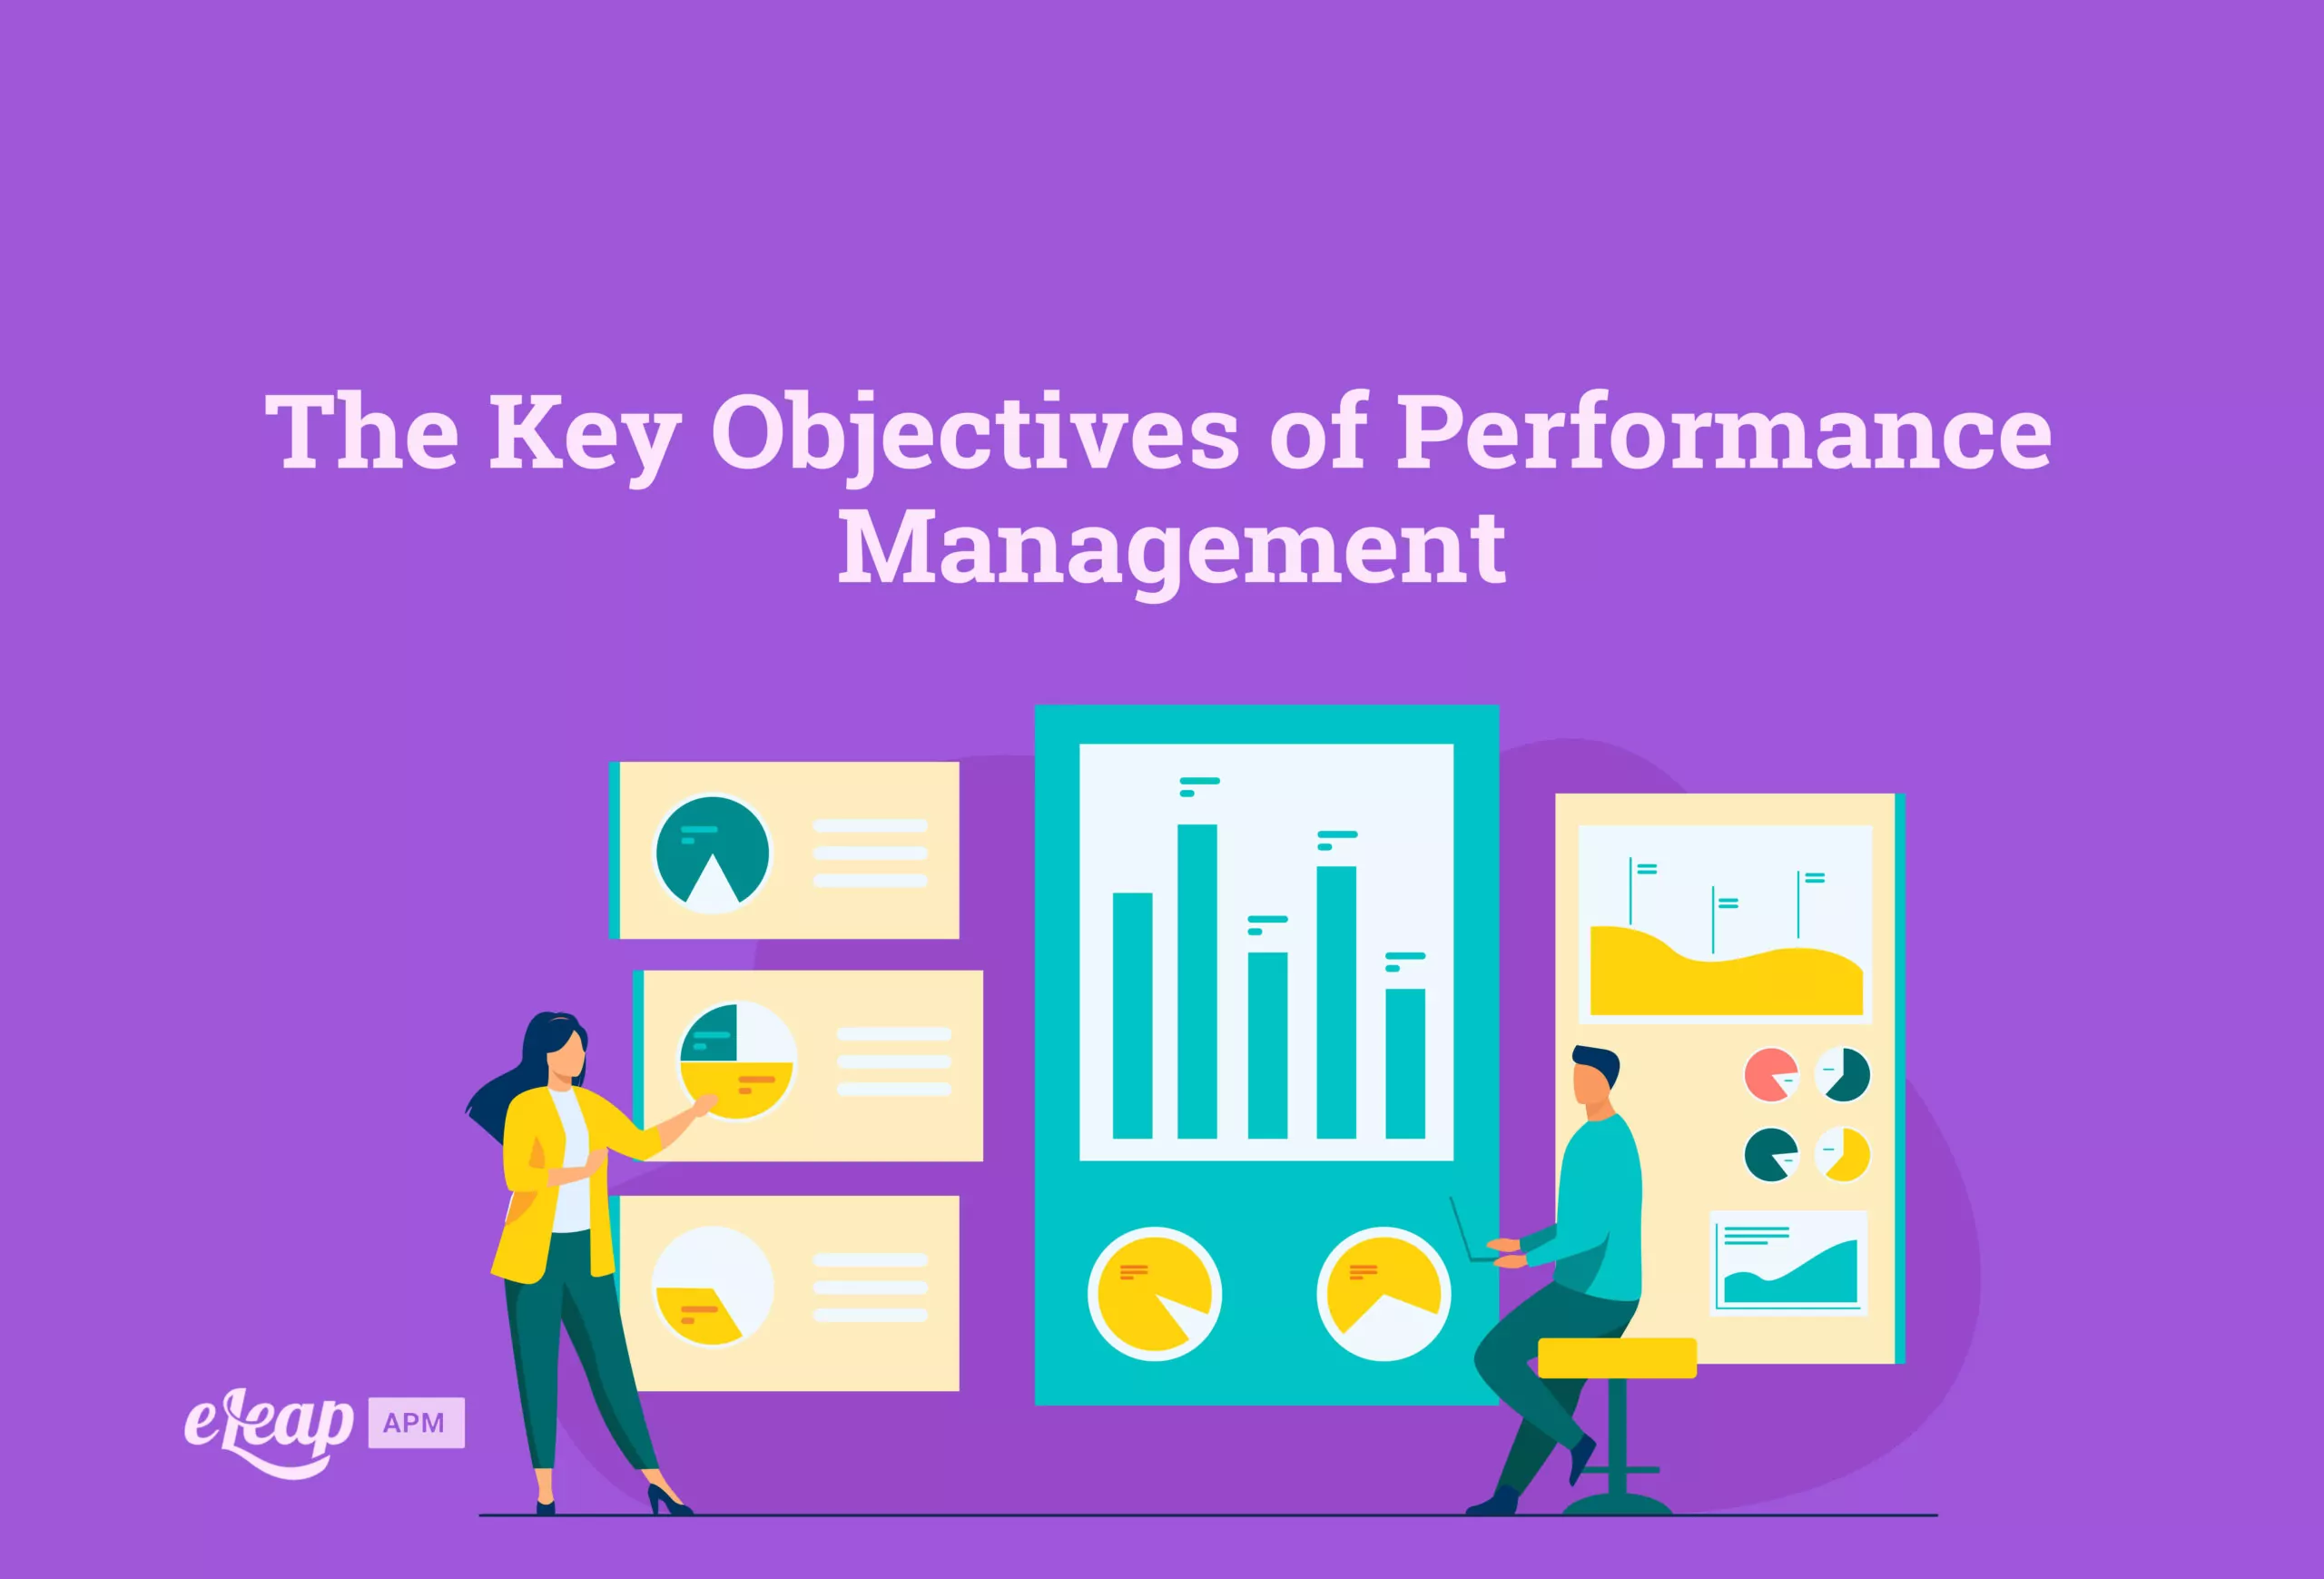 The Key Objectives of Performance Management